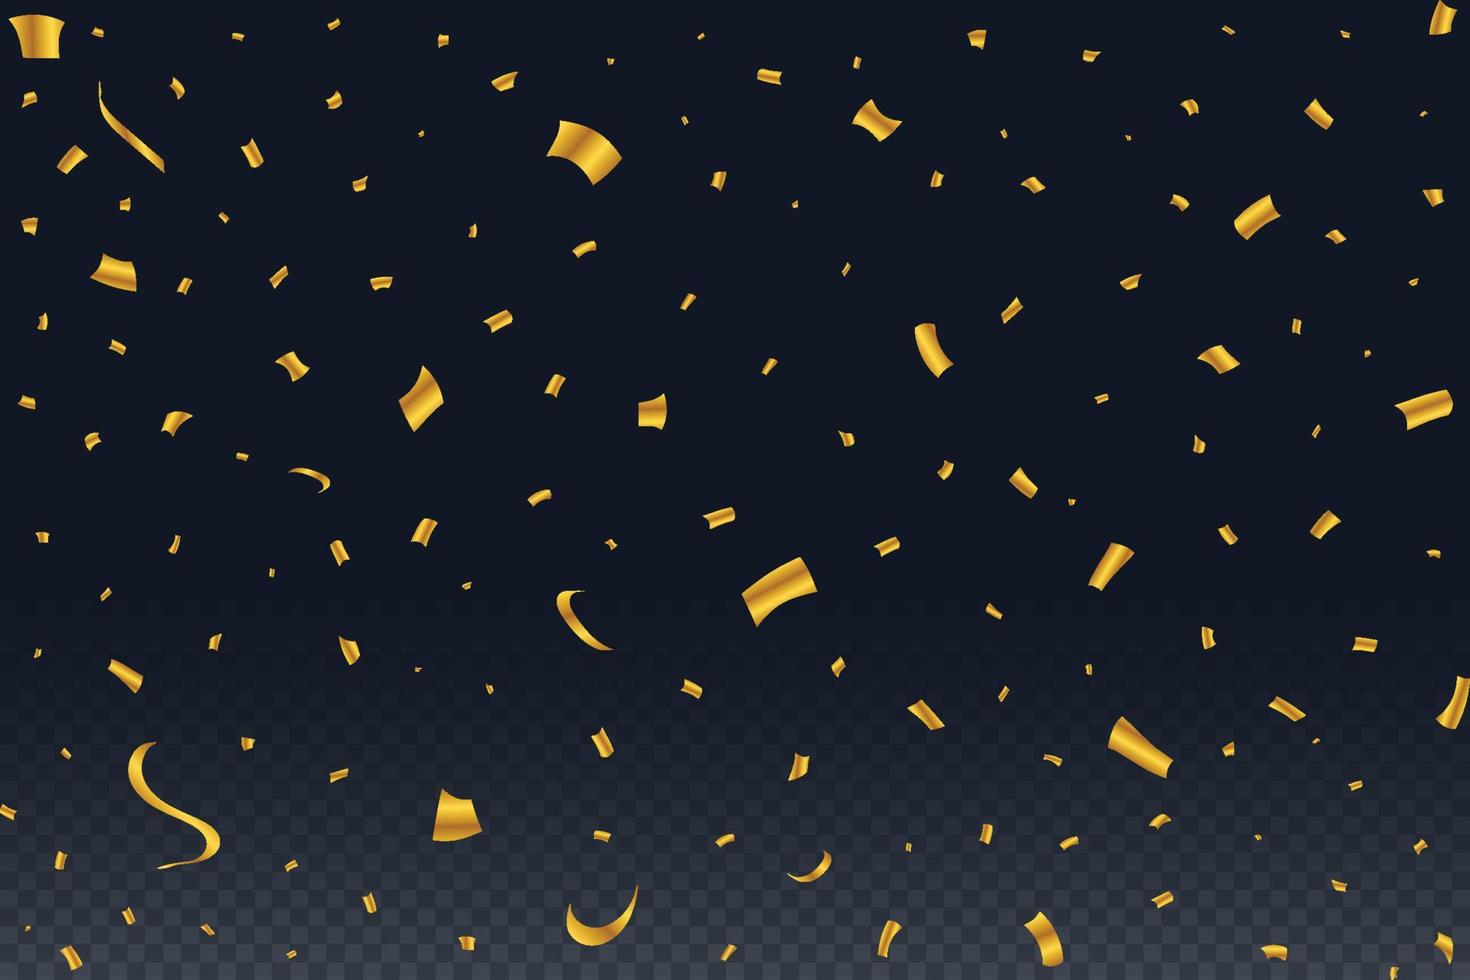 Golden confetti explosion isolated on dark background. Festival elements. Shiny party tinsel and confetti falling. Confetti vector for carnival background. Anniversary celebration.